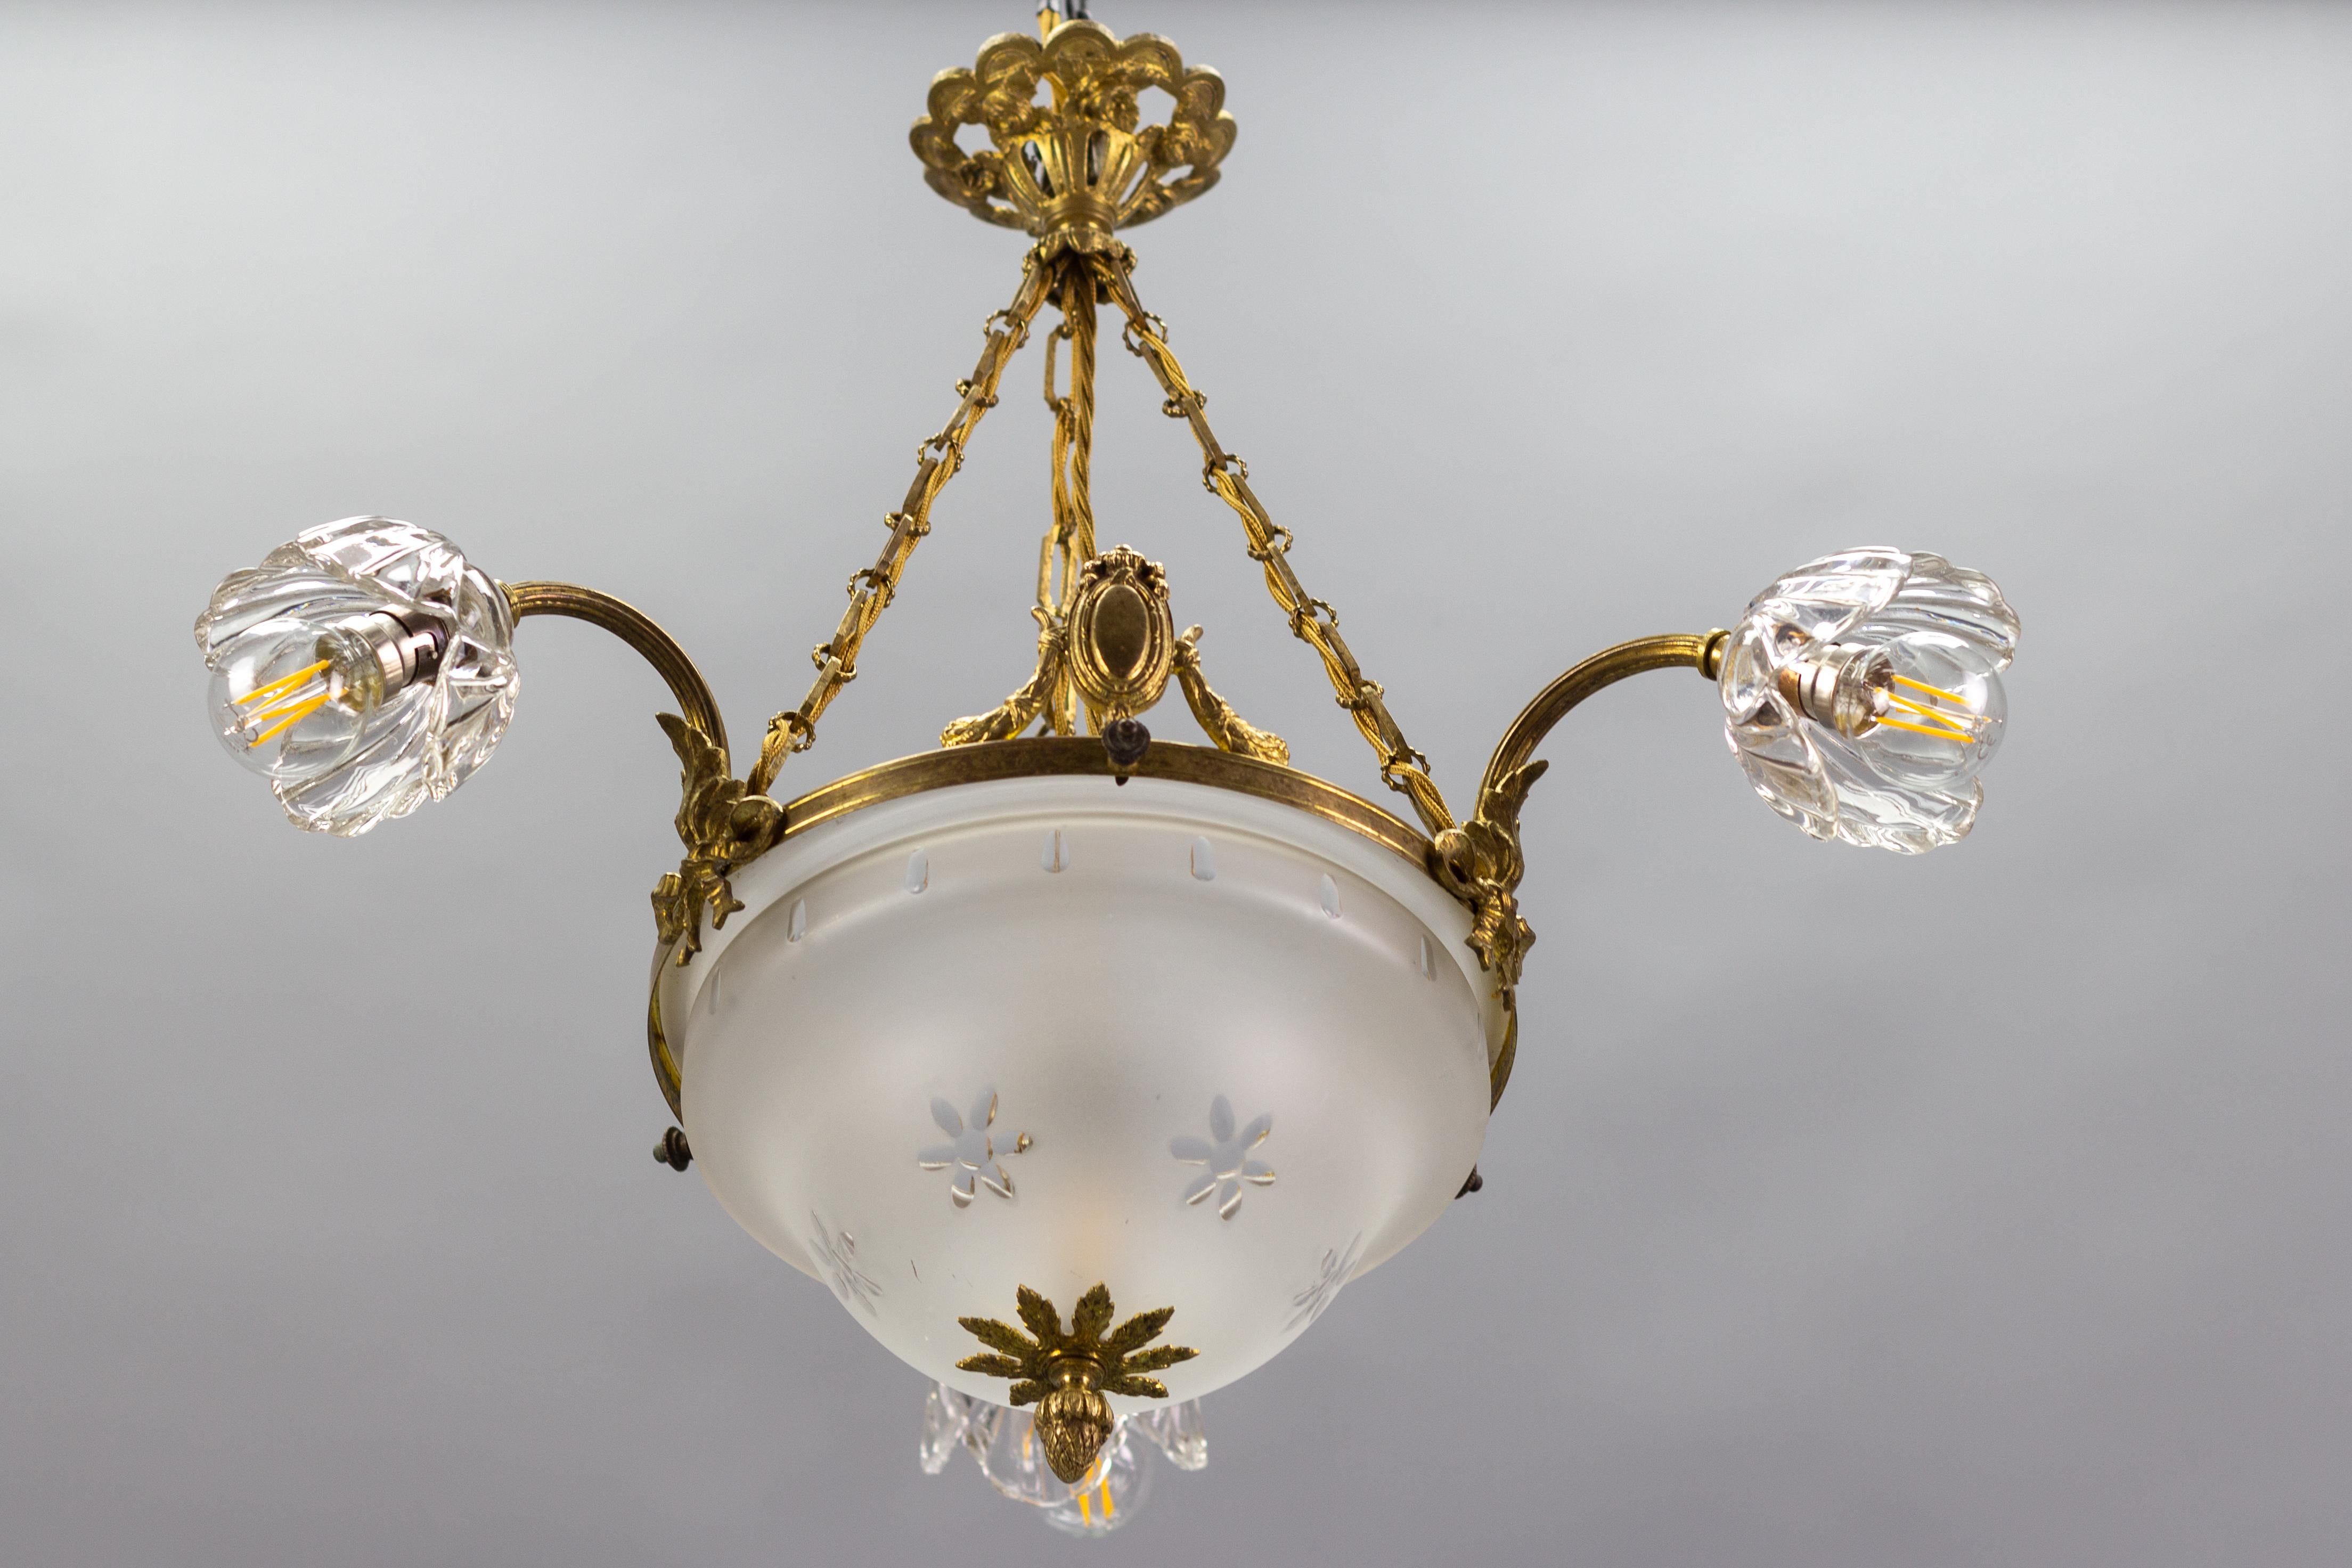 Mid-20th Century French Neoclassical Style Gilt Bronze and Glass Four-Light Chandelier For Sale